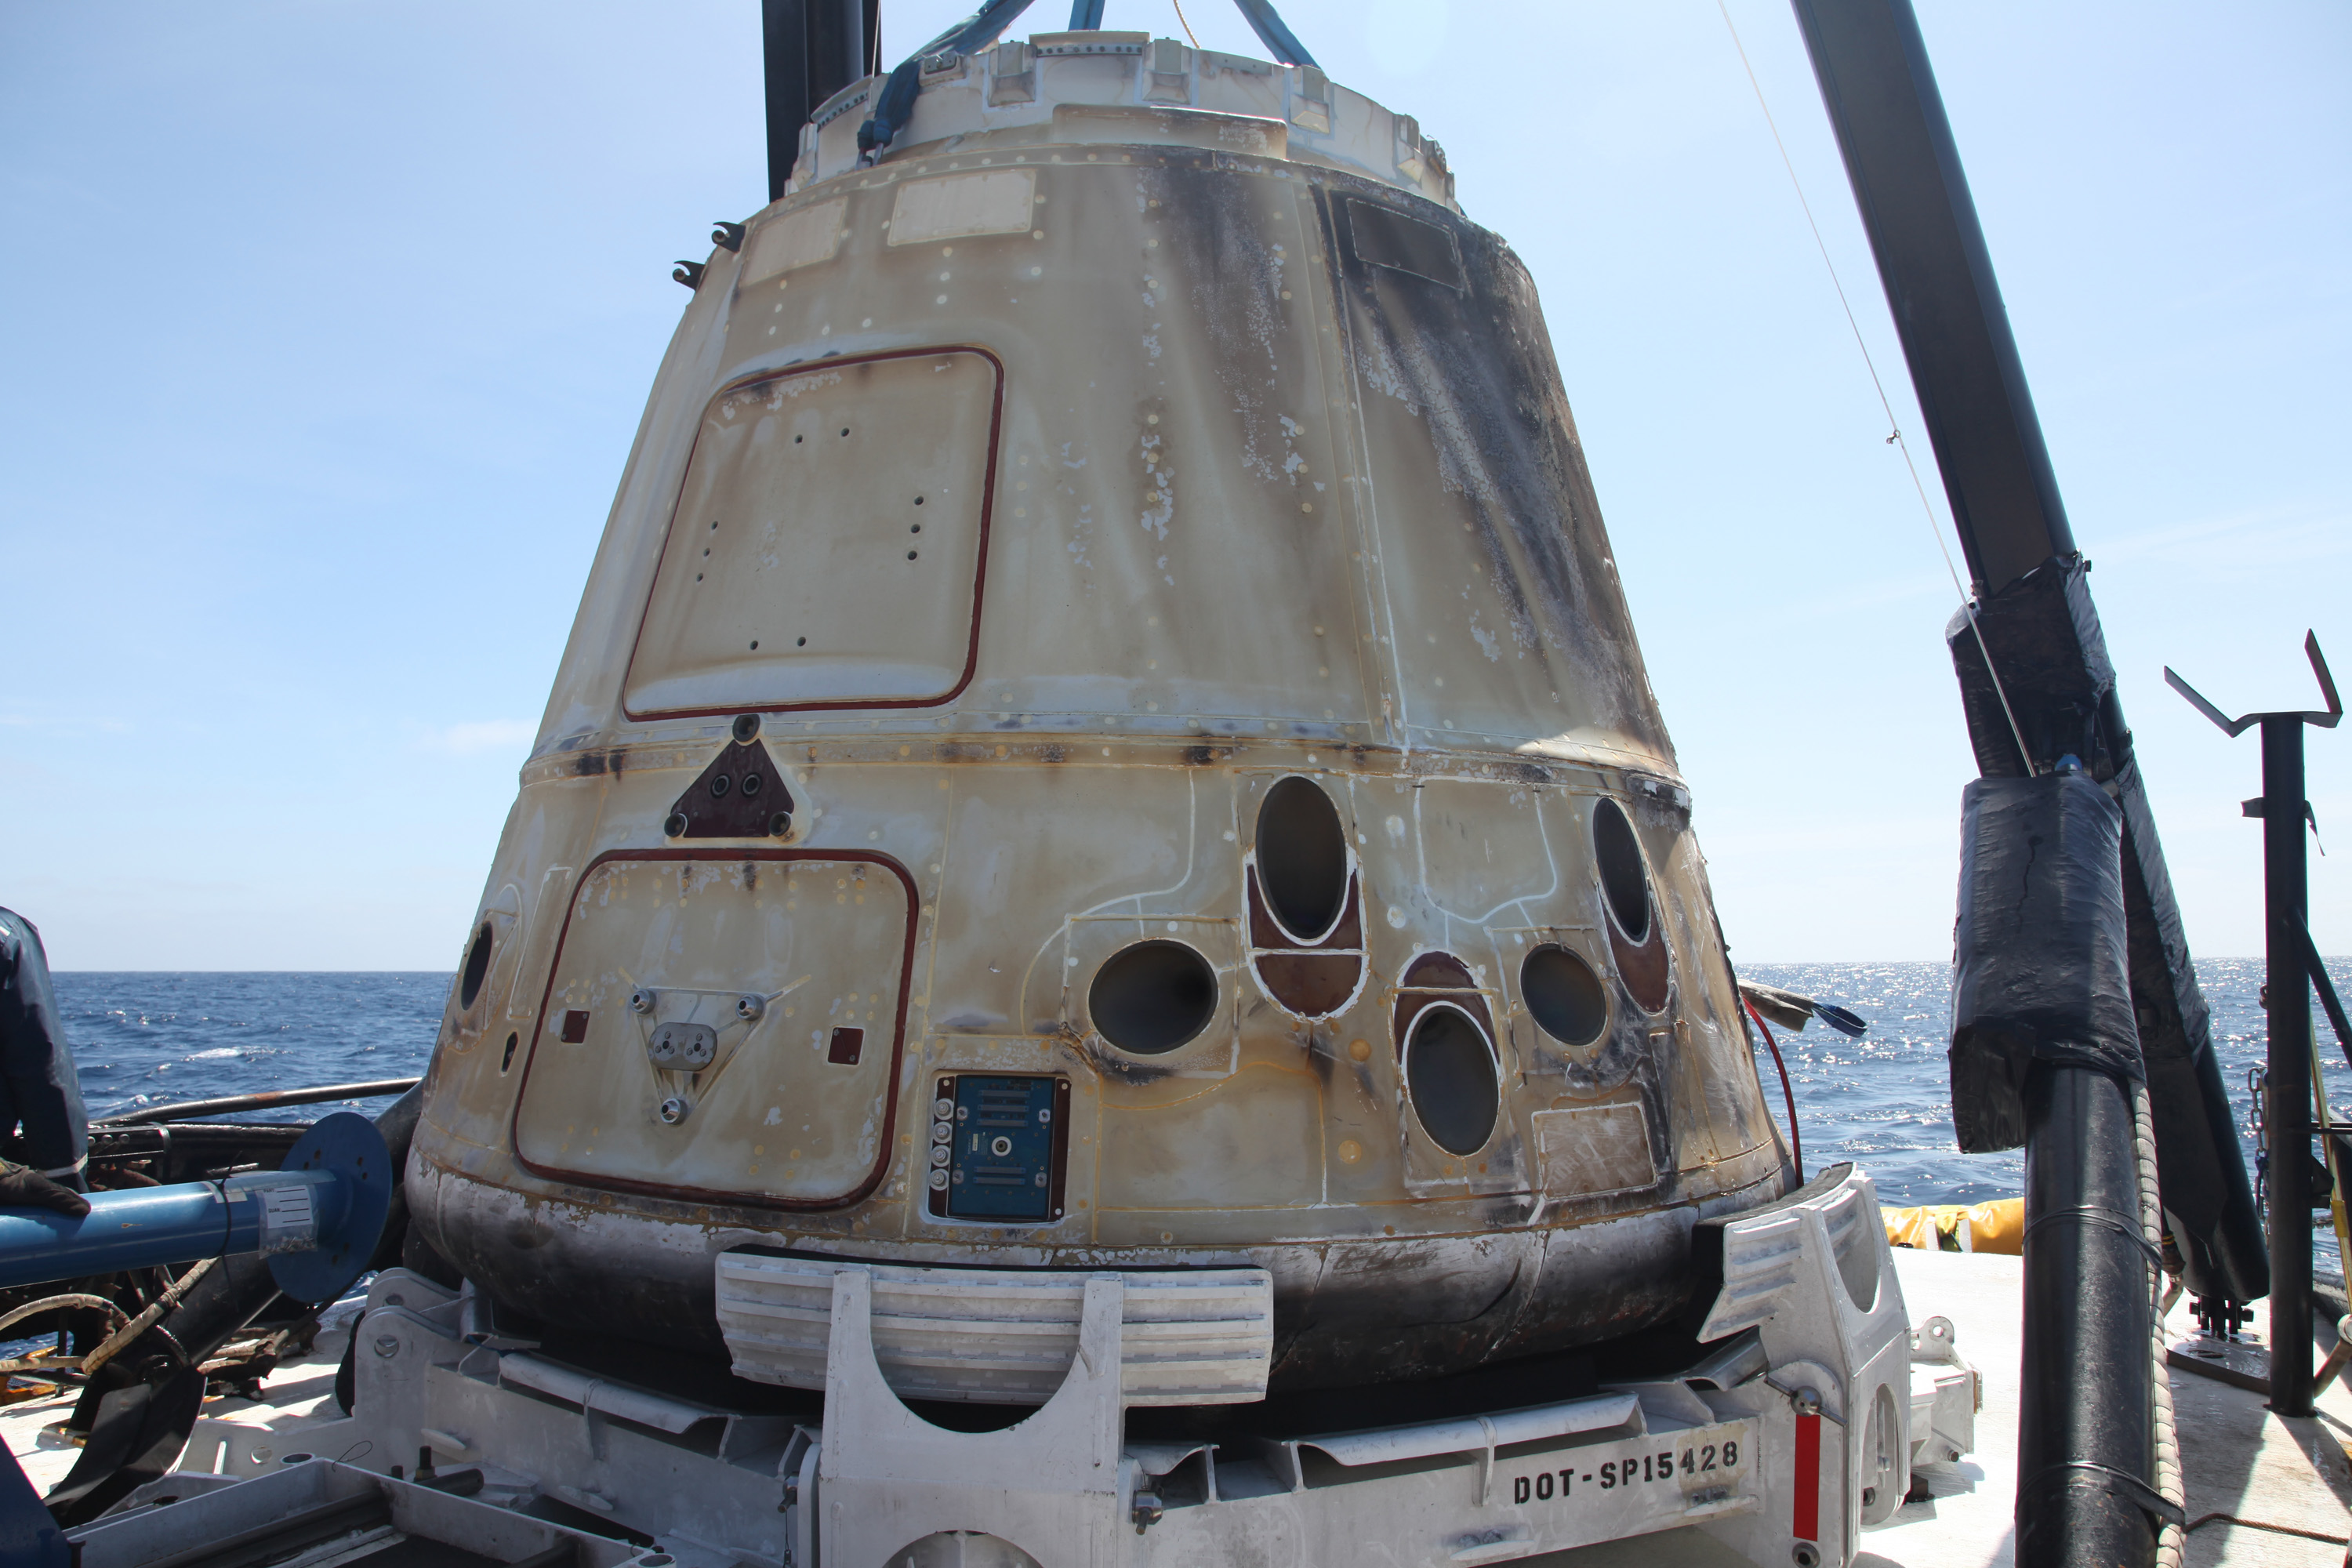 Dragon capsule, manufactured by Space-X